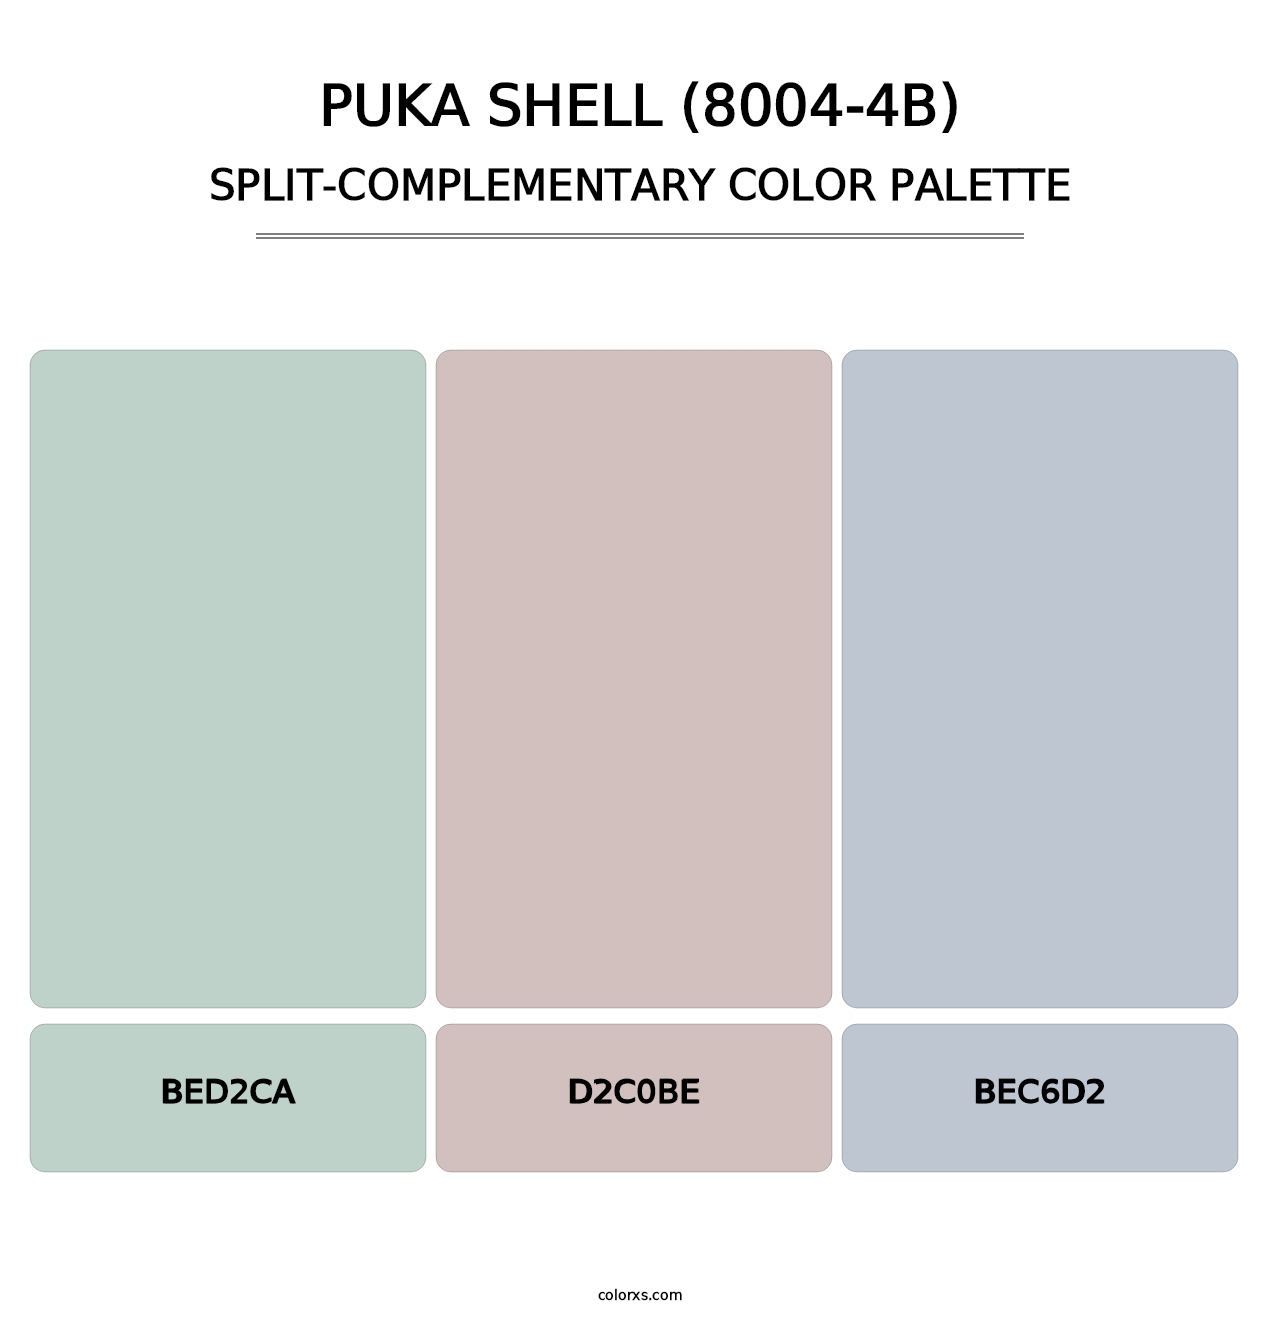 Puka Shell (8004-4B) - Split-Complementary Color Palette